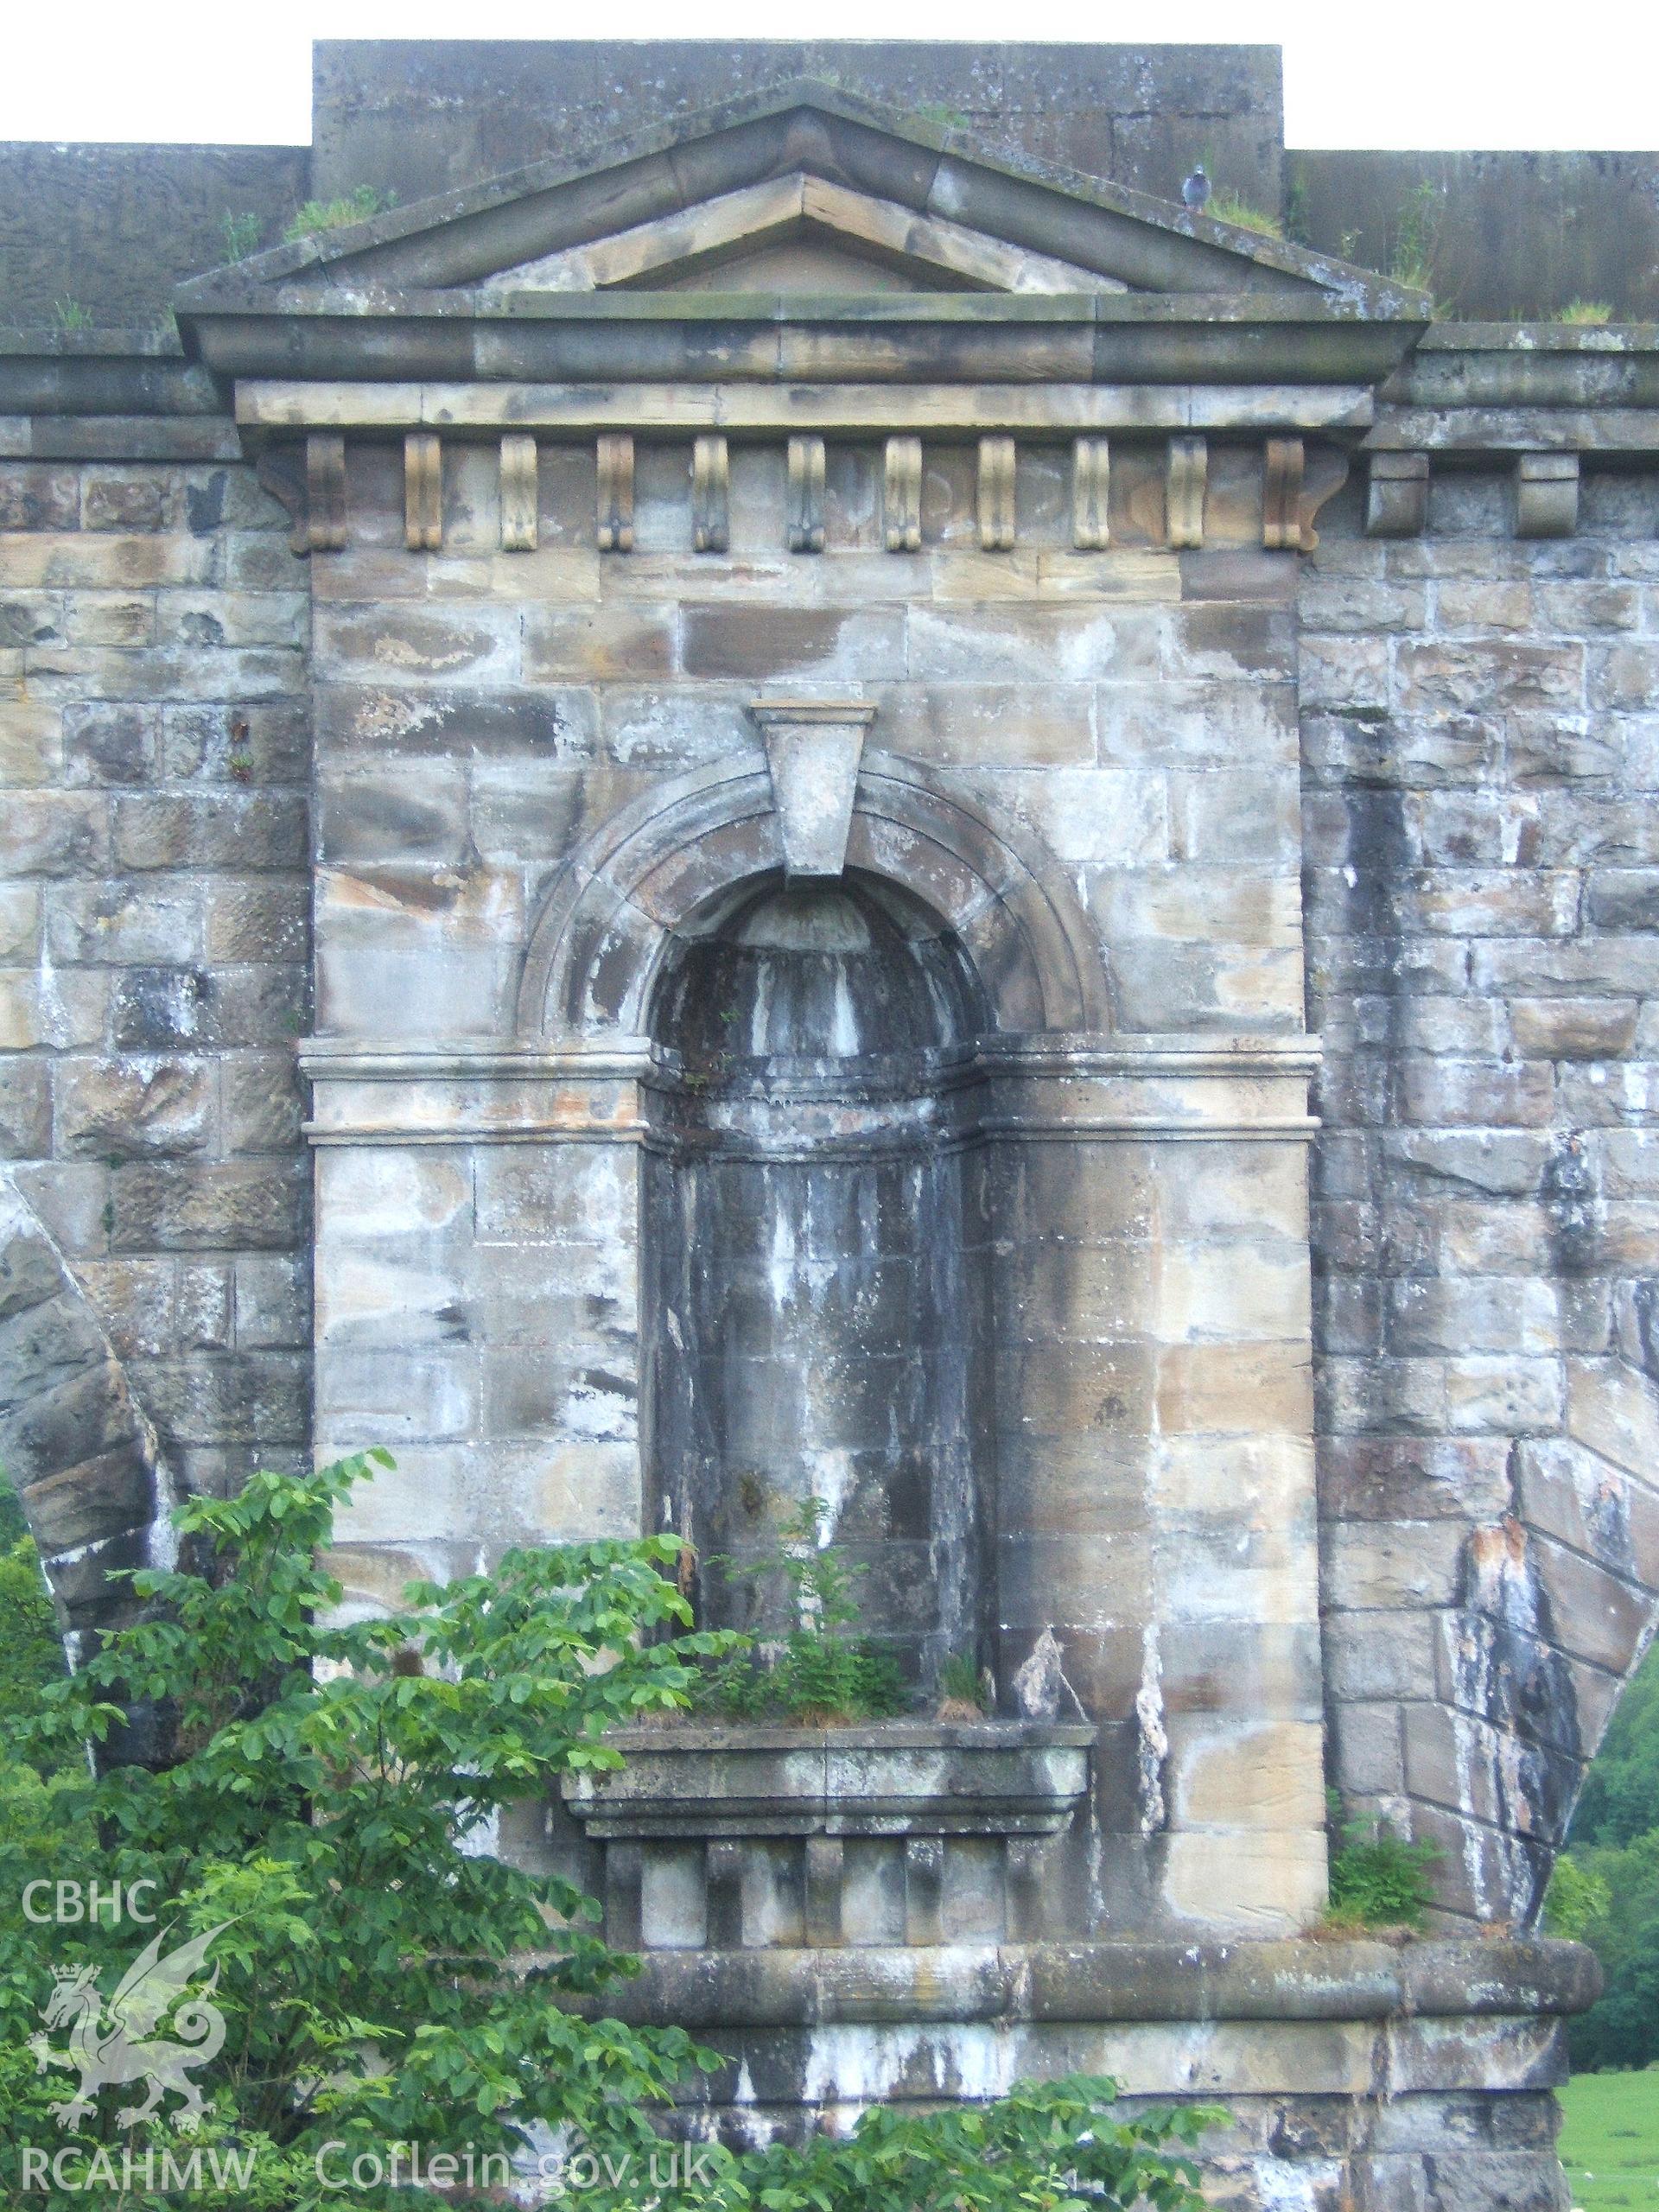 Close-up of niche showing corbelled cornices.